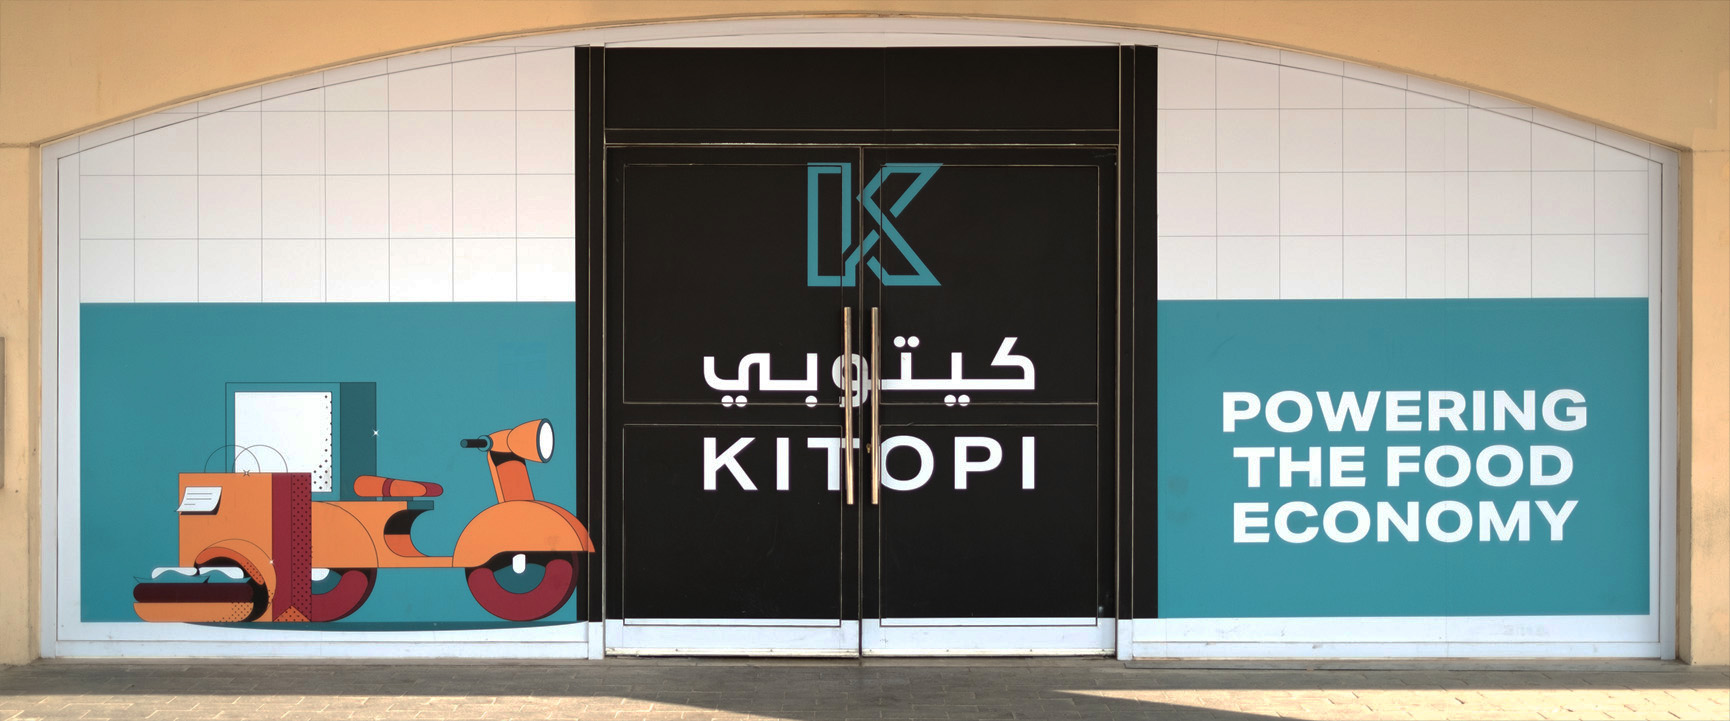 Front shop of one of Kitopi's kitchens in Dubai, UAE